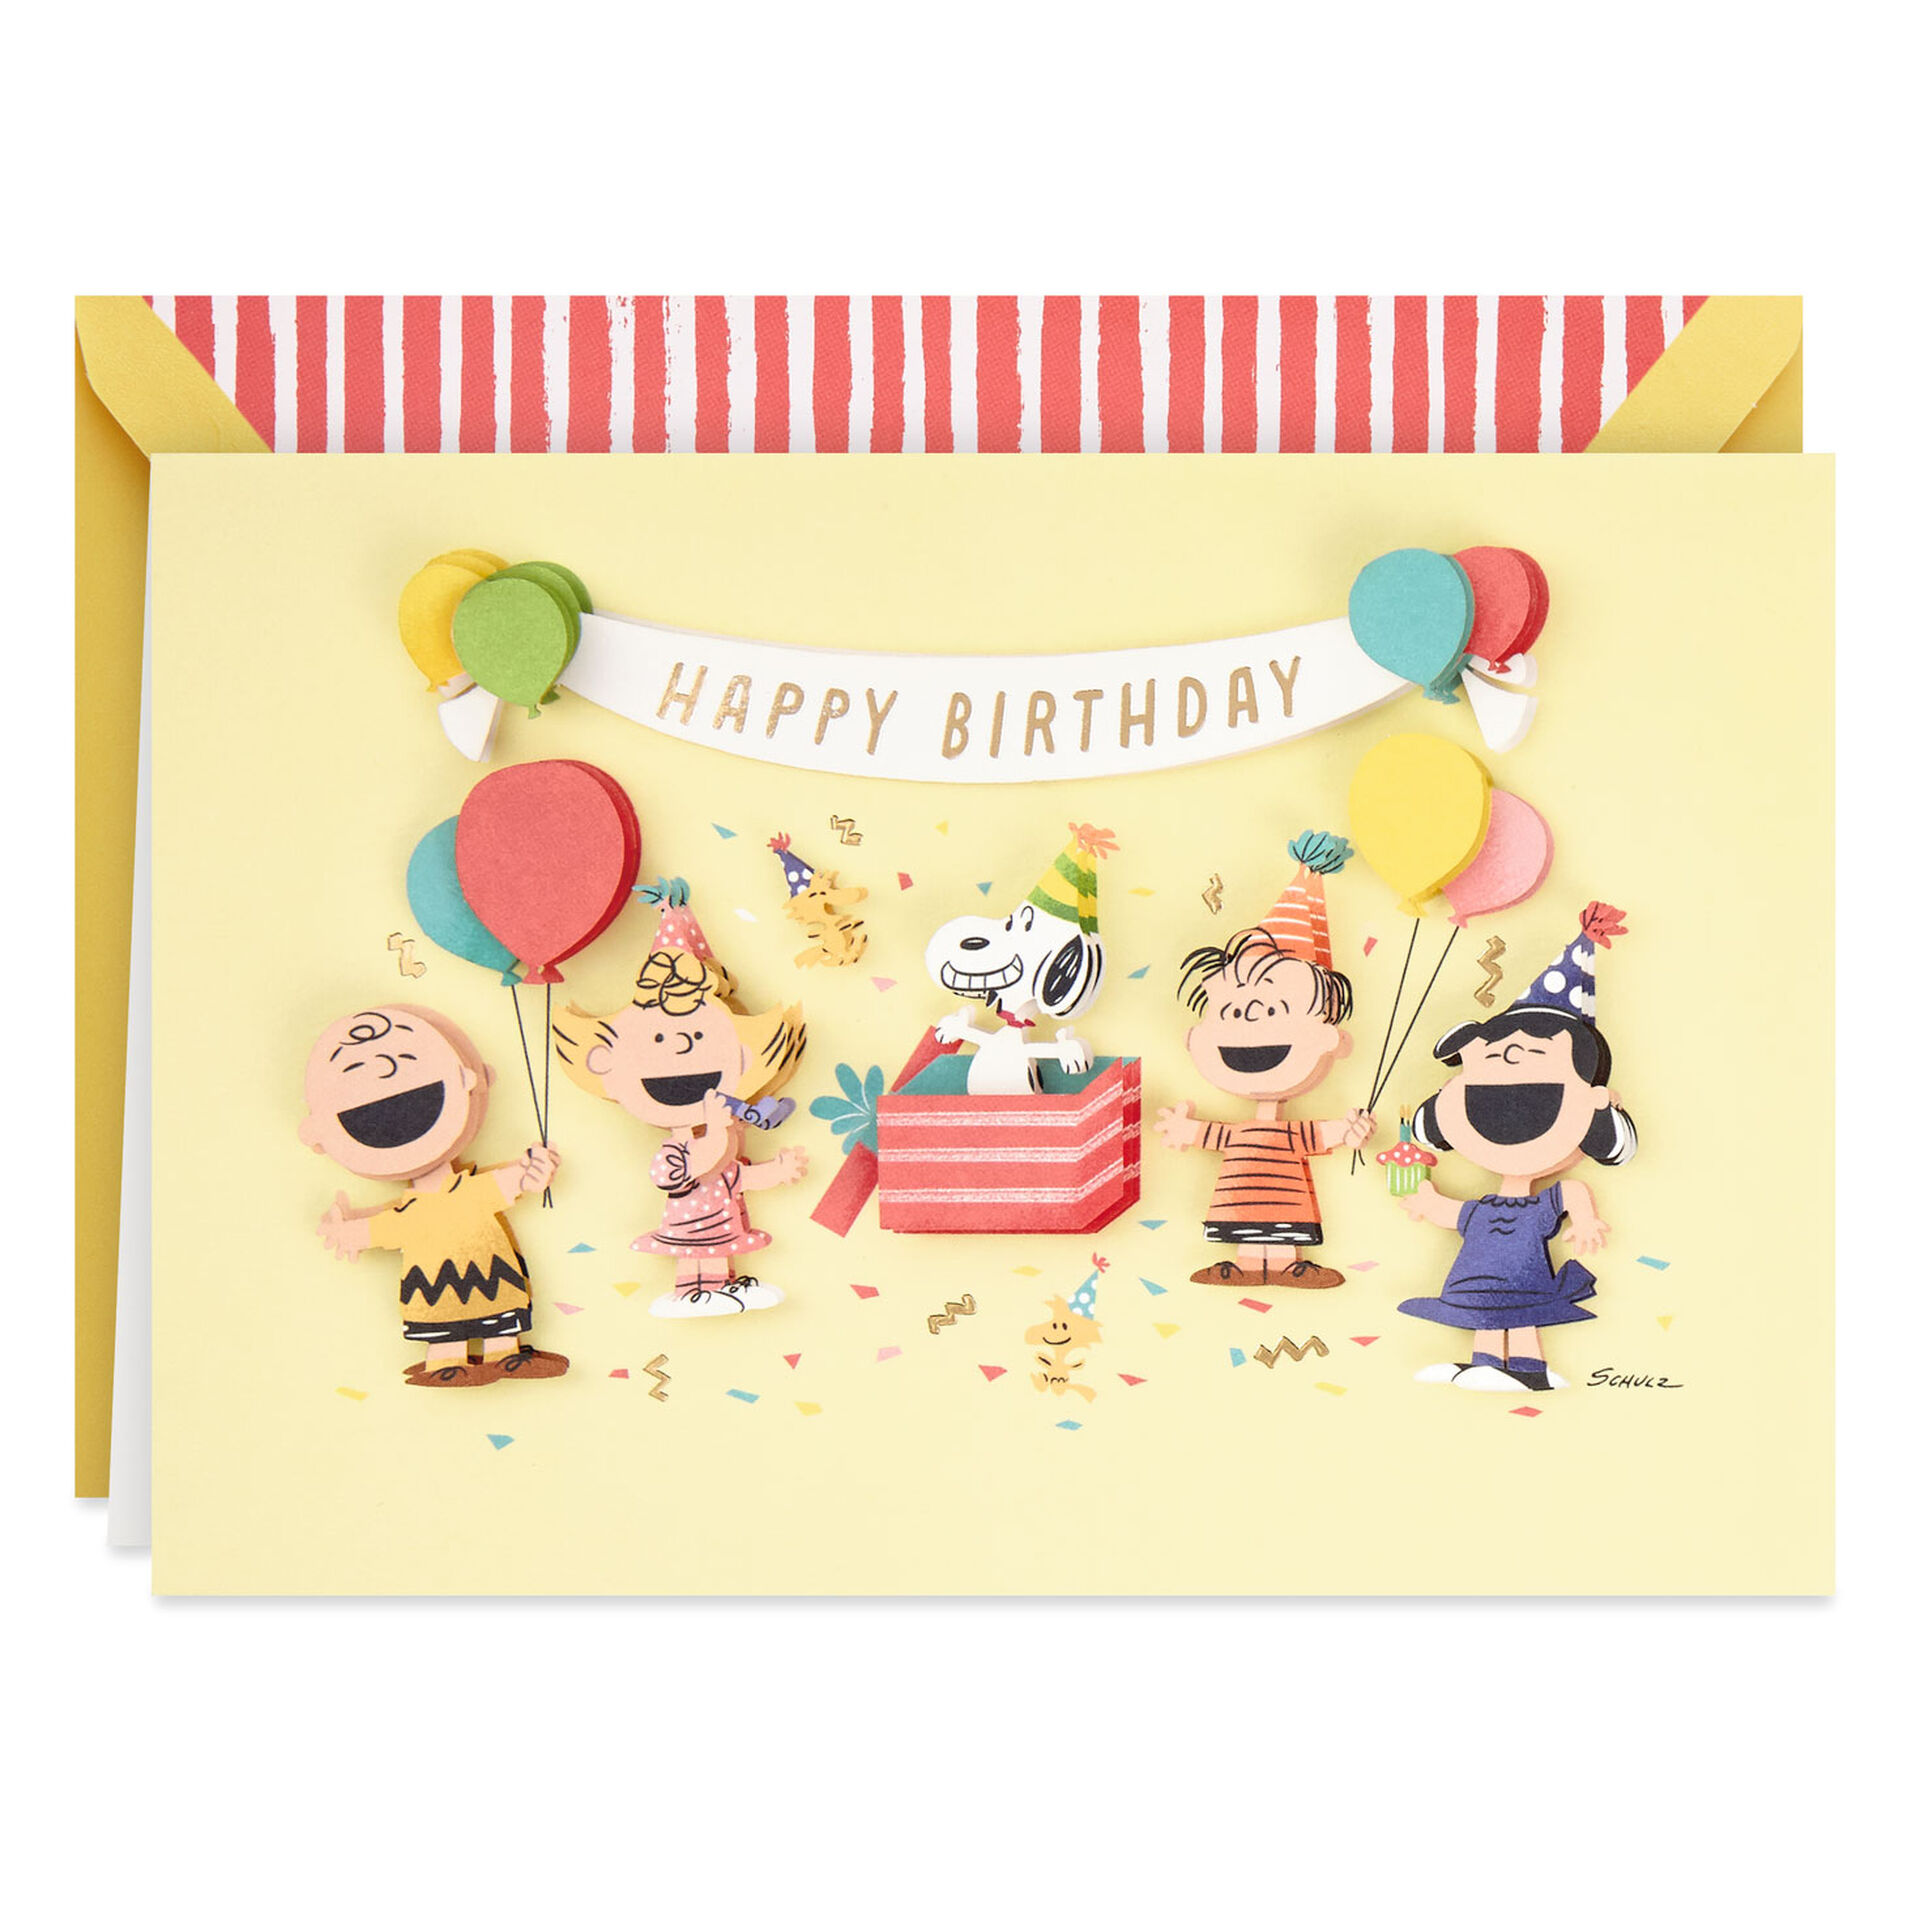 Peanuts-Gang-Surprise-Party-Birthday-Card_799LAD2688_01